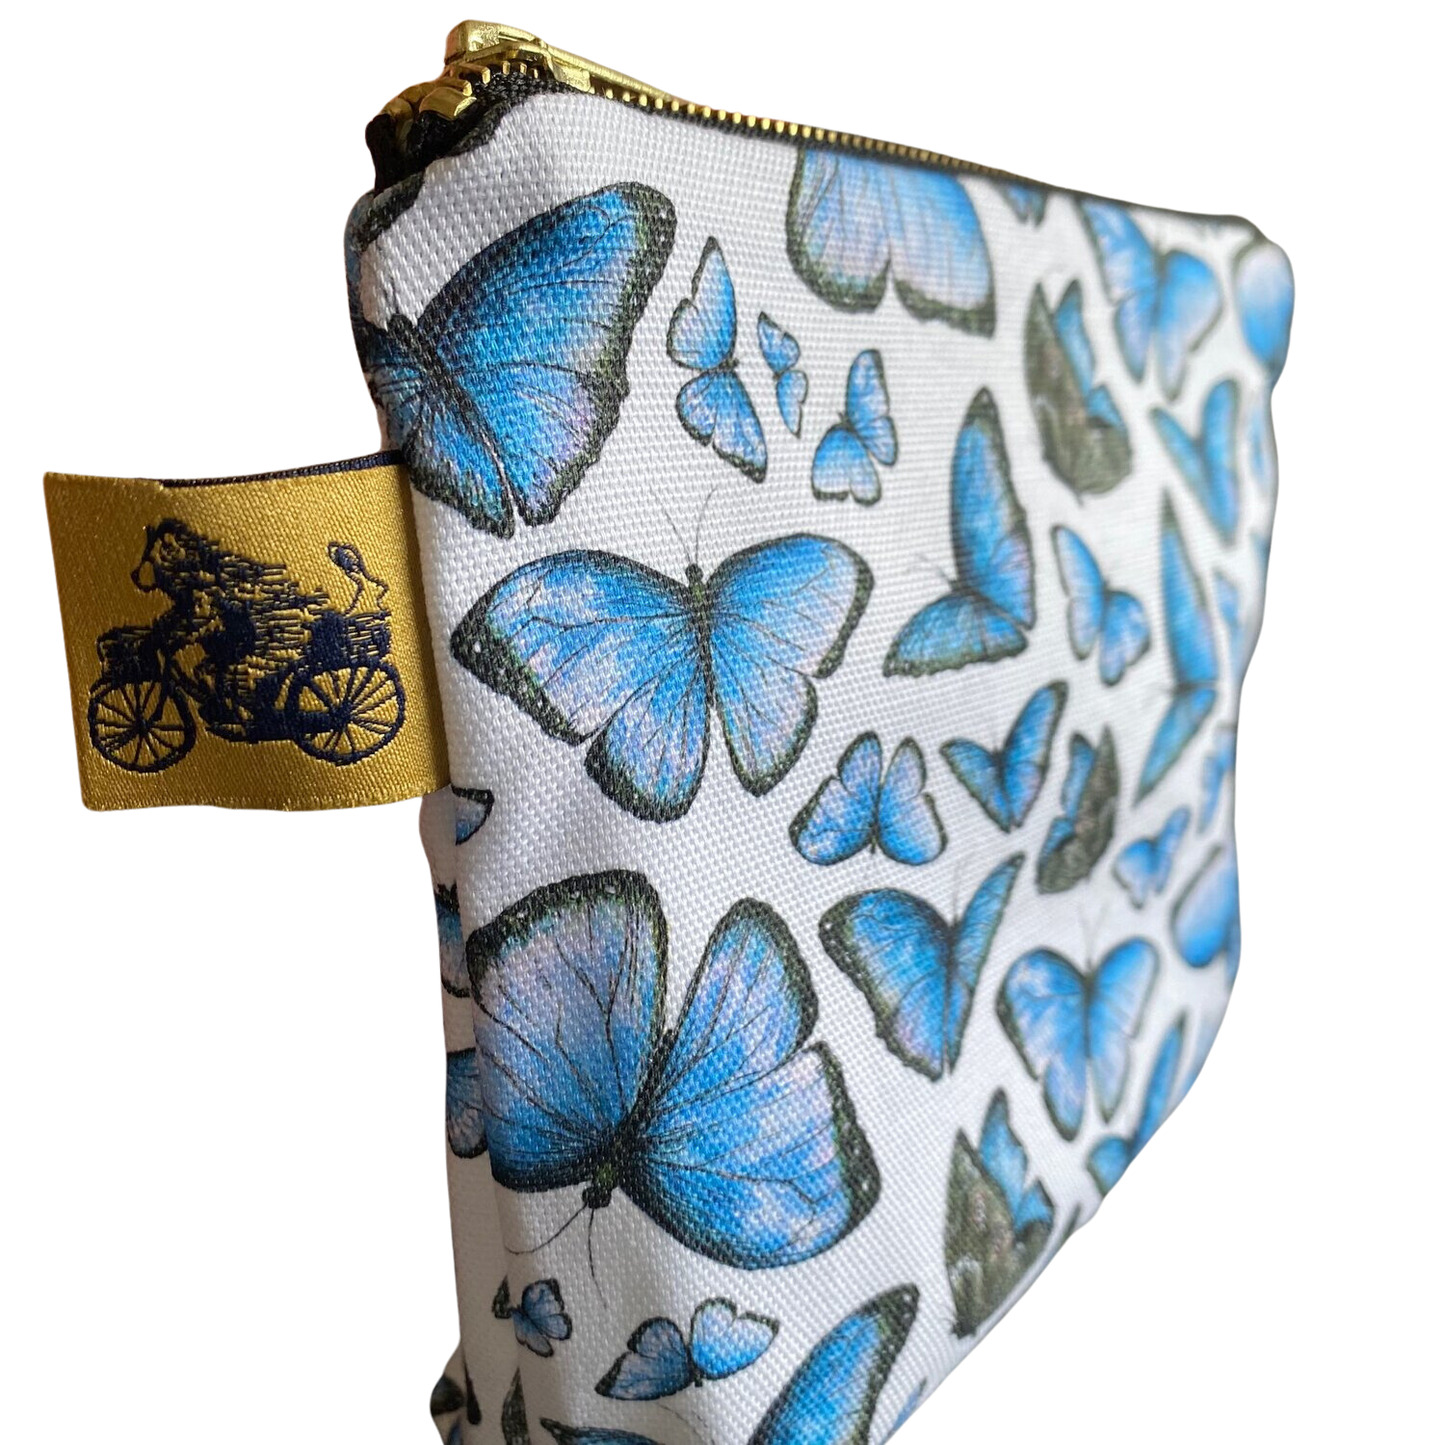 Butterfly Wash Bag